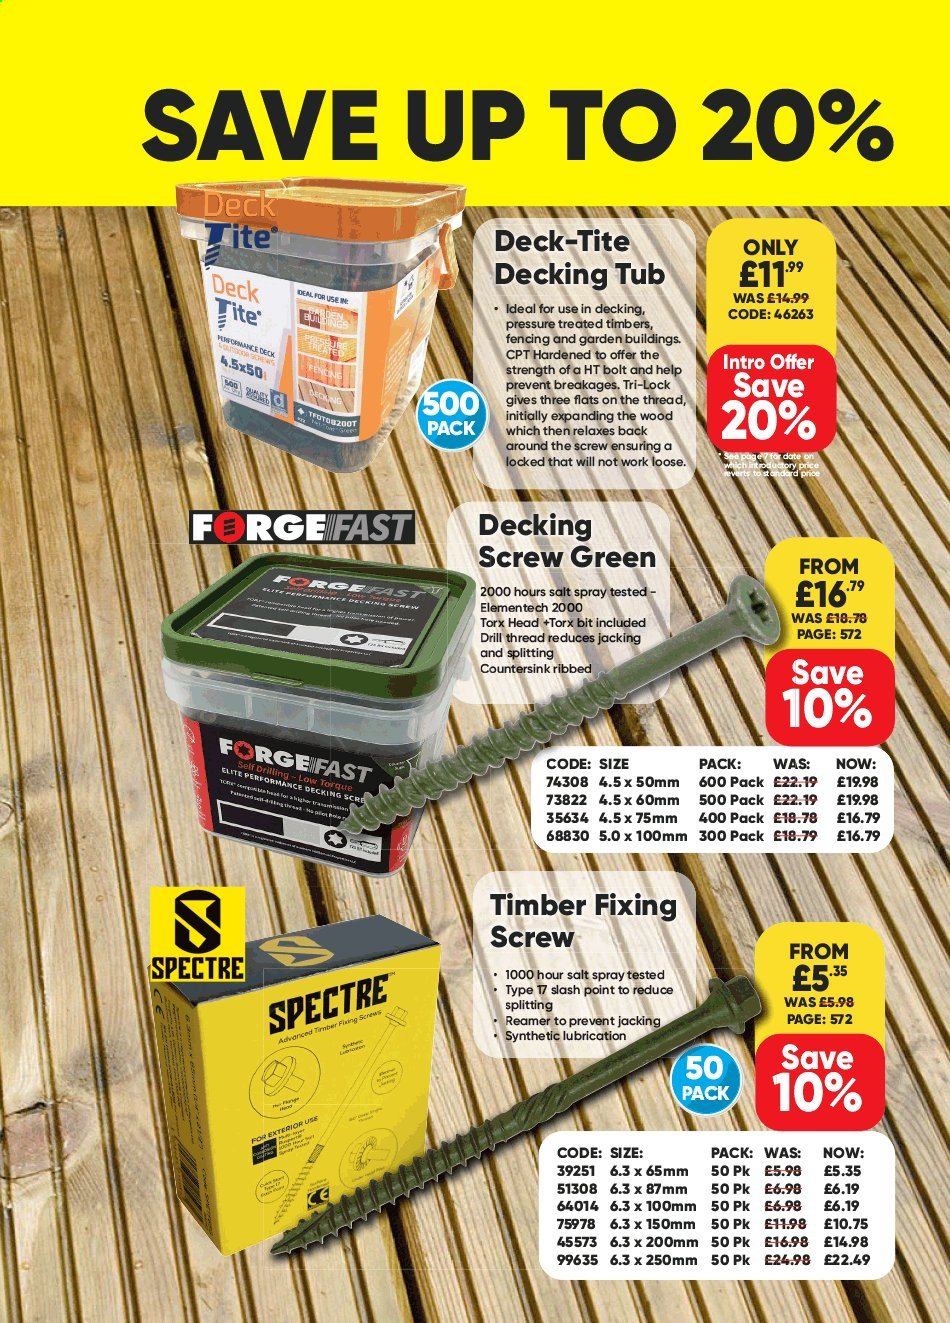 Toolstation offer . Page 565.